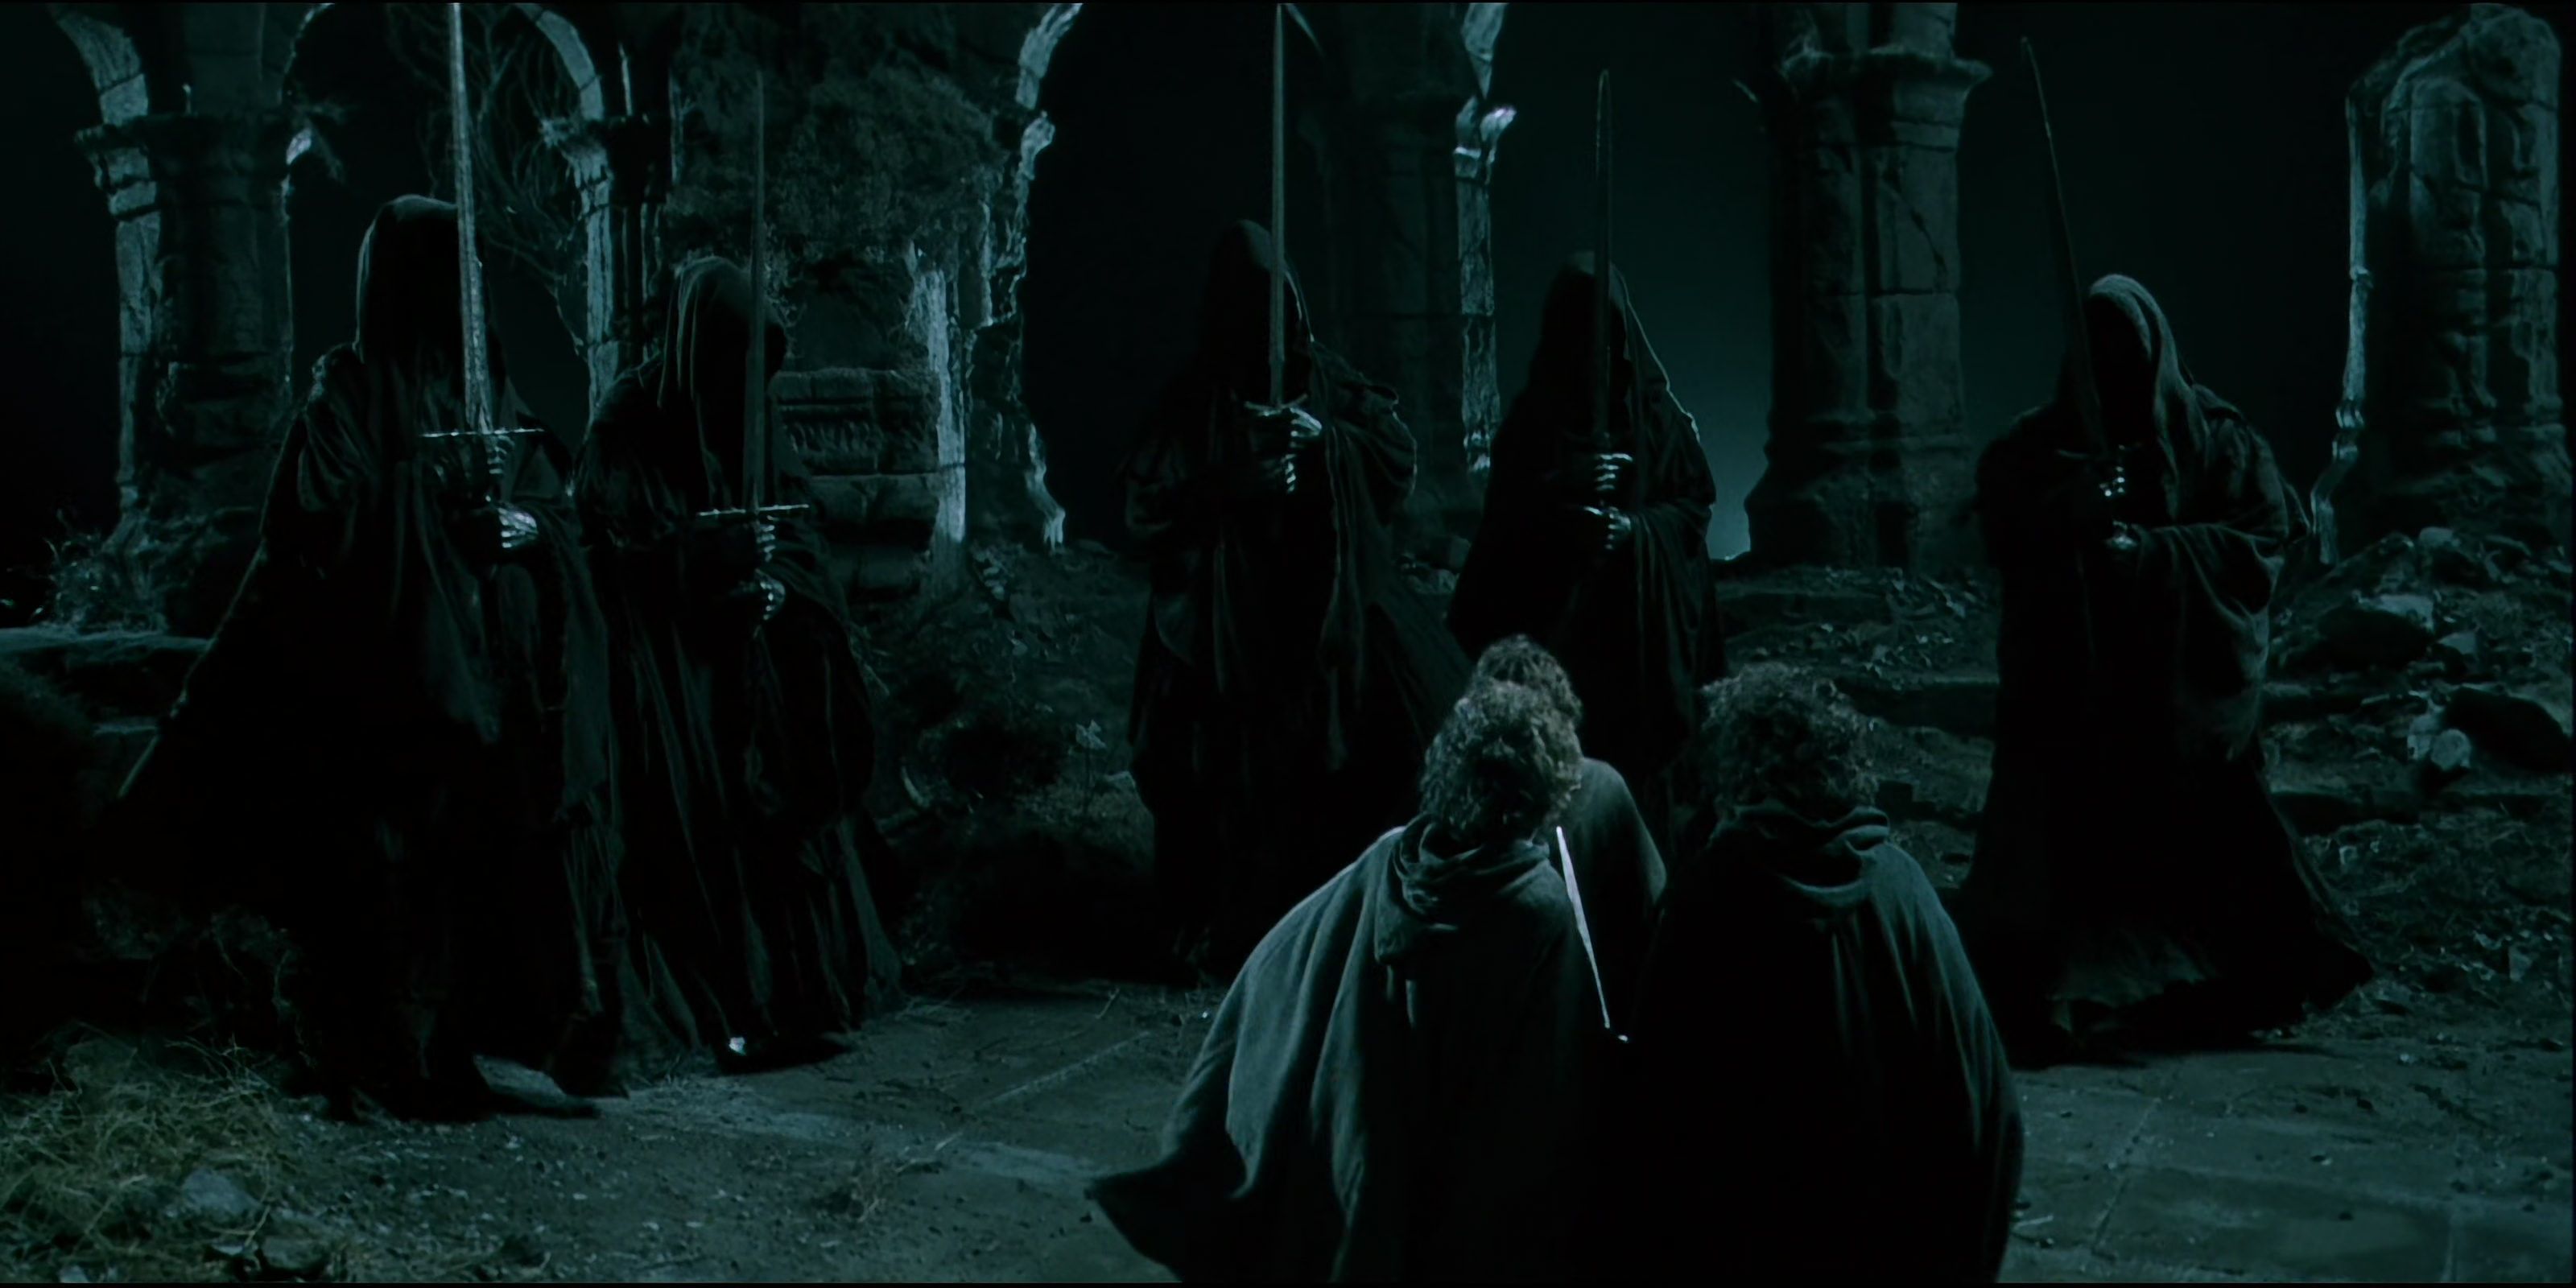 The Nazgul on Weathertop in The Lord of the Rings: The Fellowship of the Ring